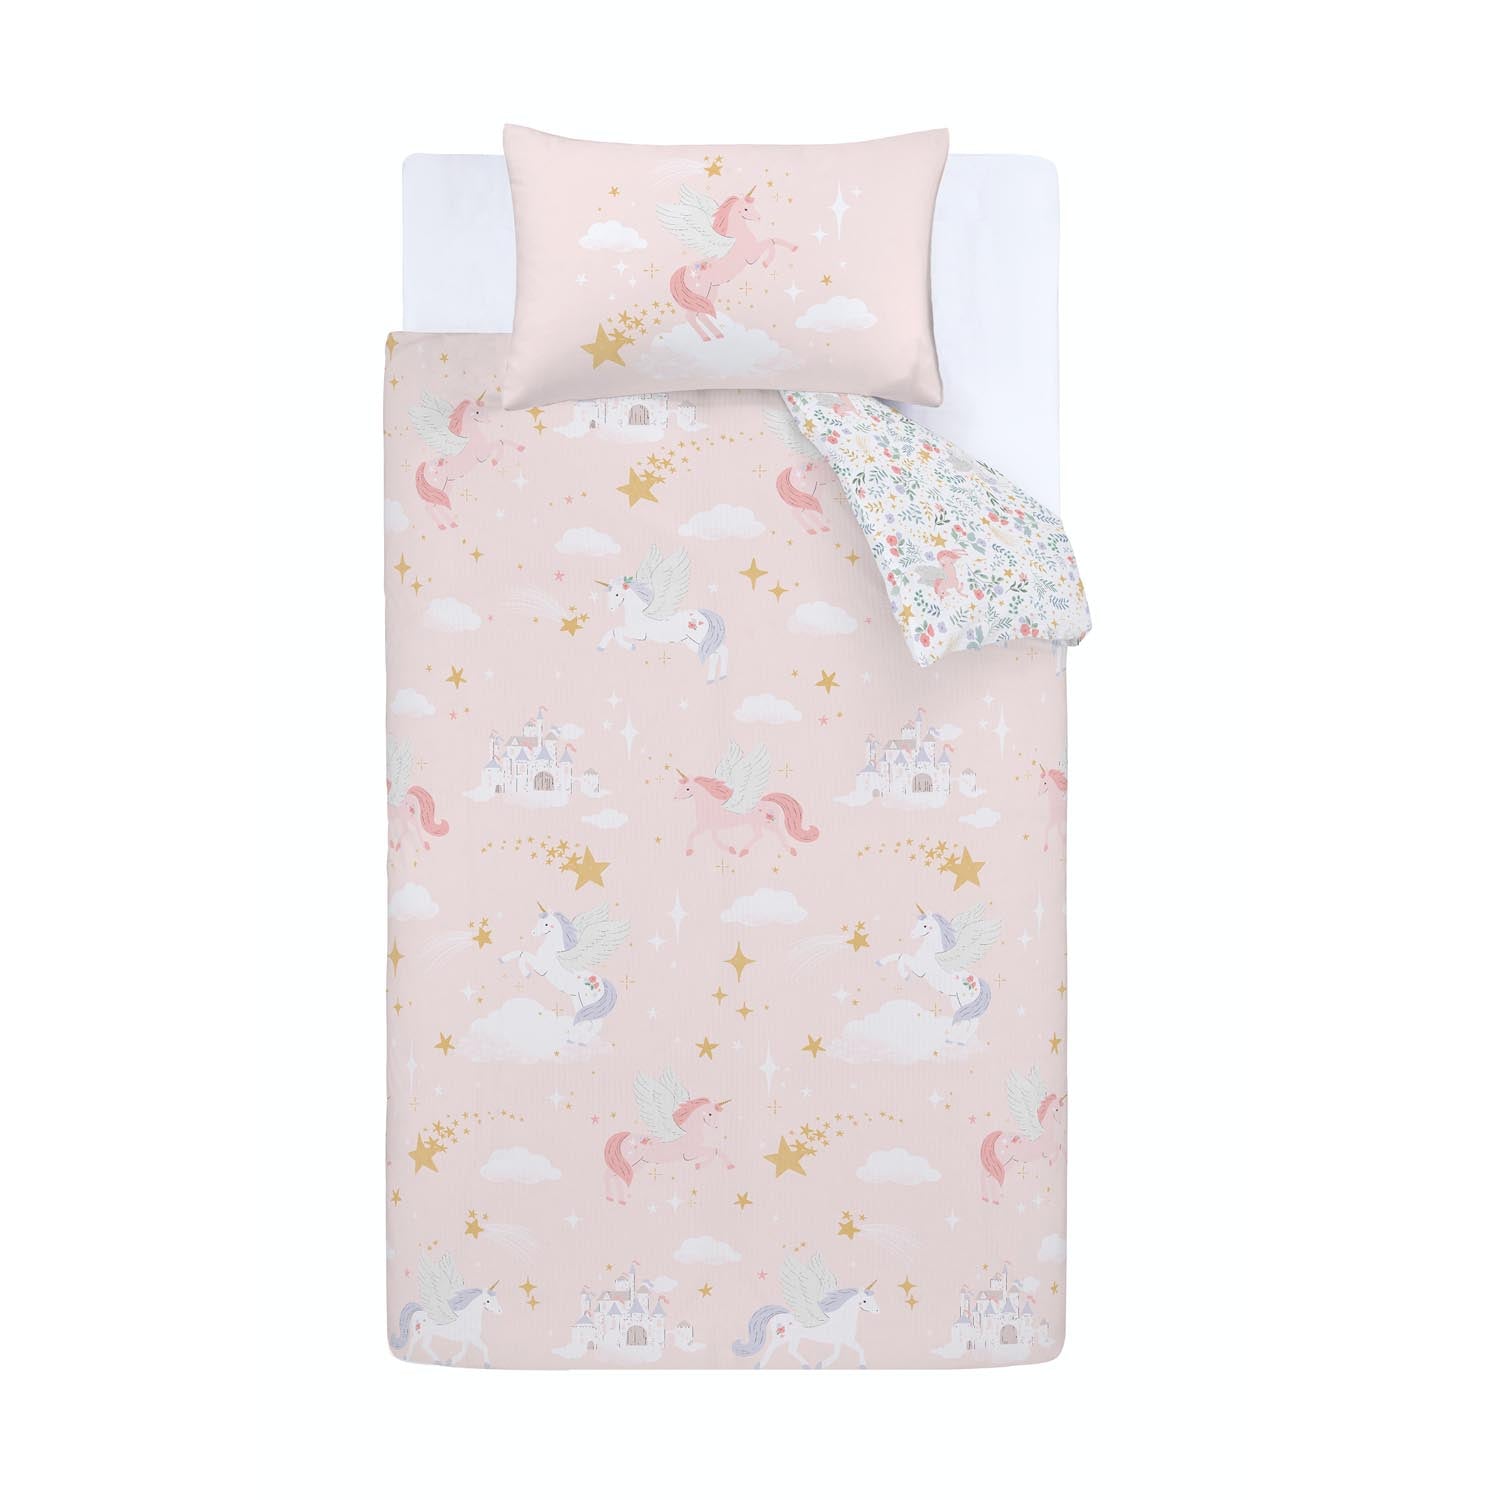 The Home Luxury Collection Magical Unicorn Duvet Cover Set 3 Shaws Department Stores